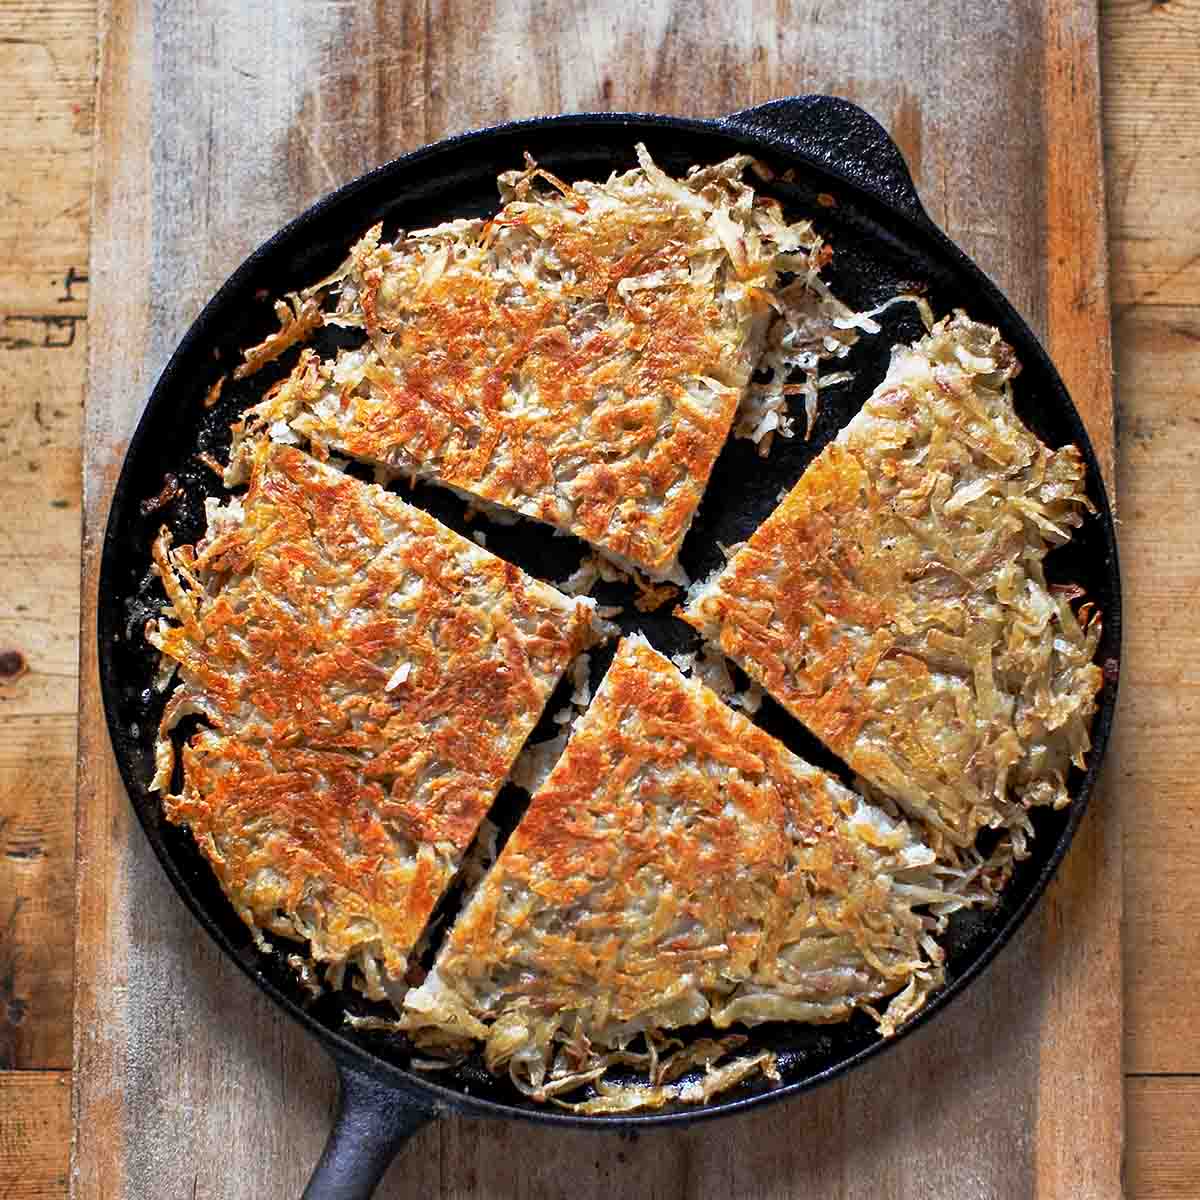 Cast iron skillet with a pan boxty (Irish potato pancake) in it, on a wooden cutting board.